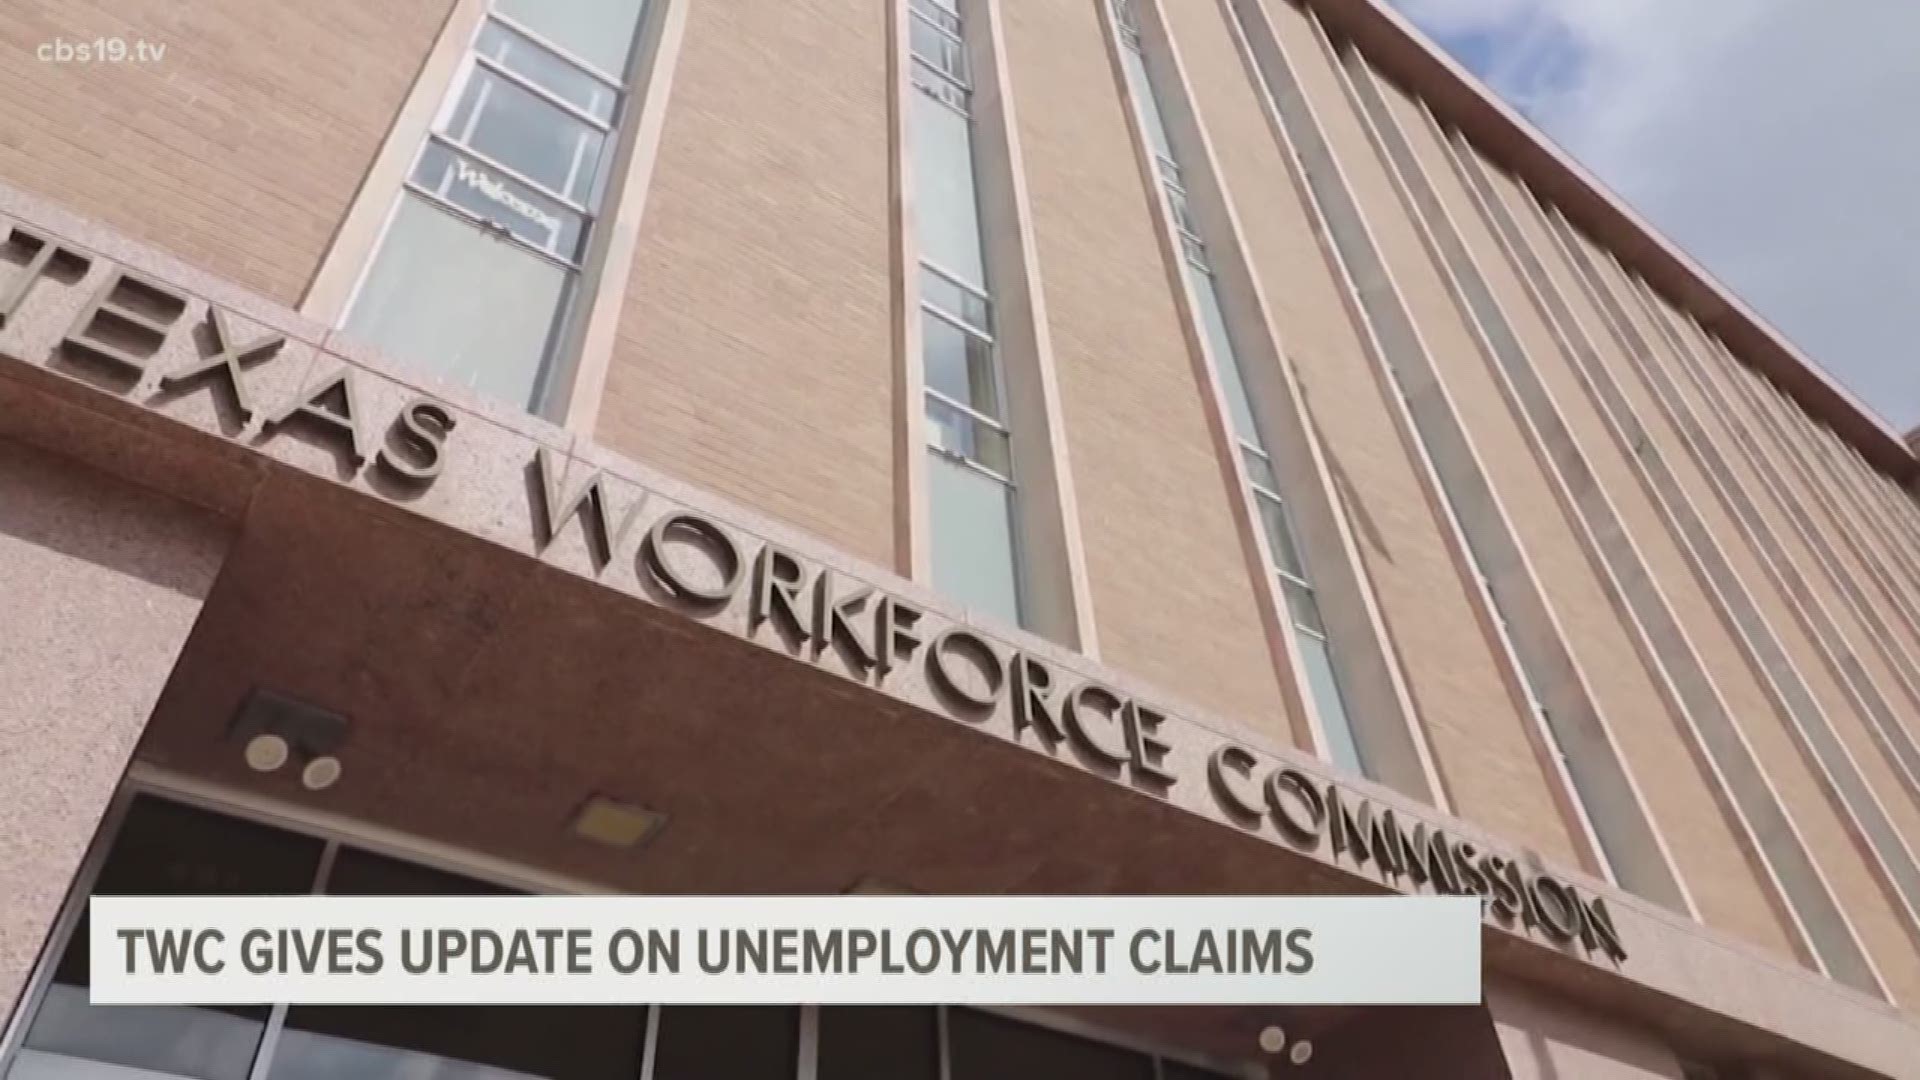 Texas Workforce Commission Provides Update For People Struggling To Receive Unemployment Benefits Cbs19 Tv